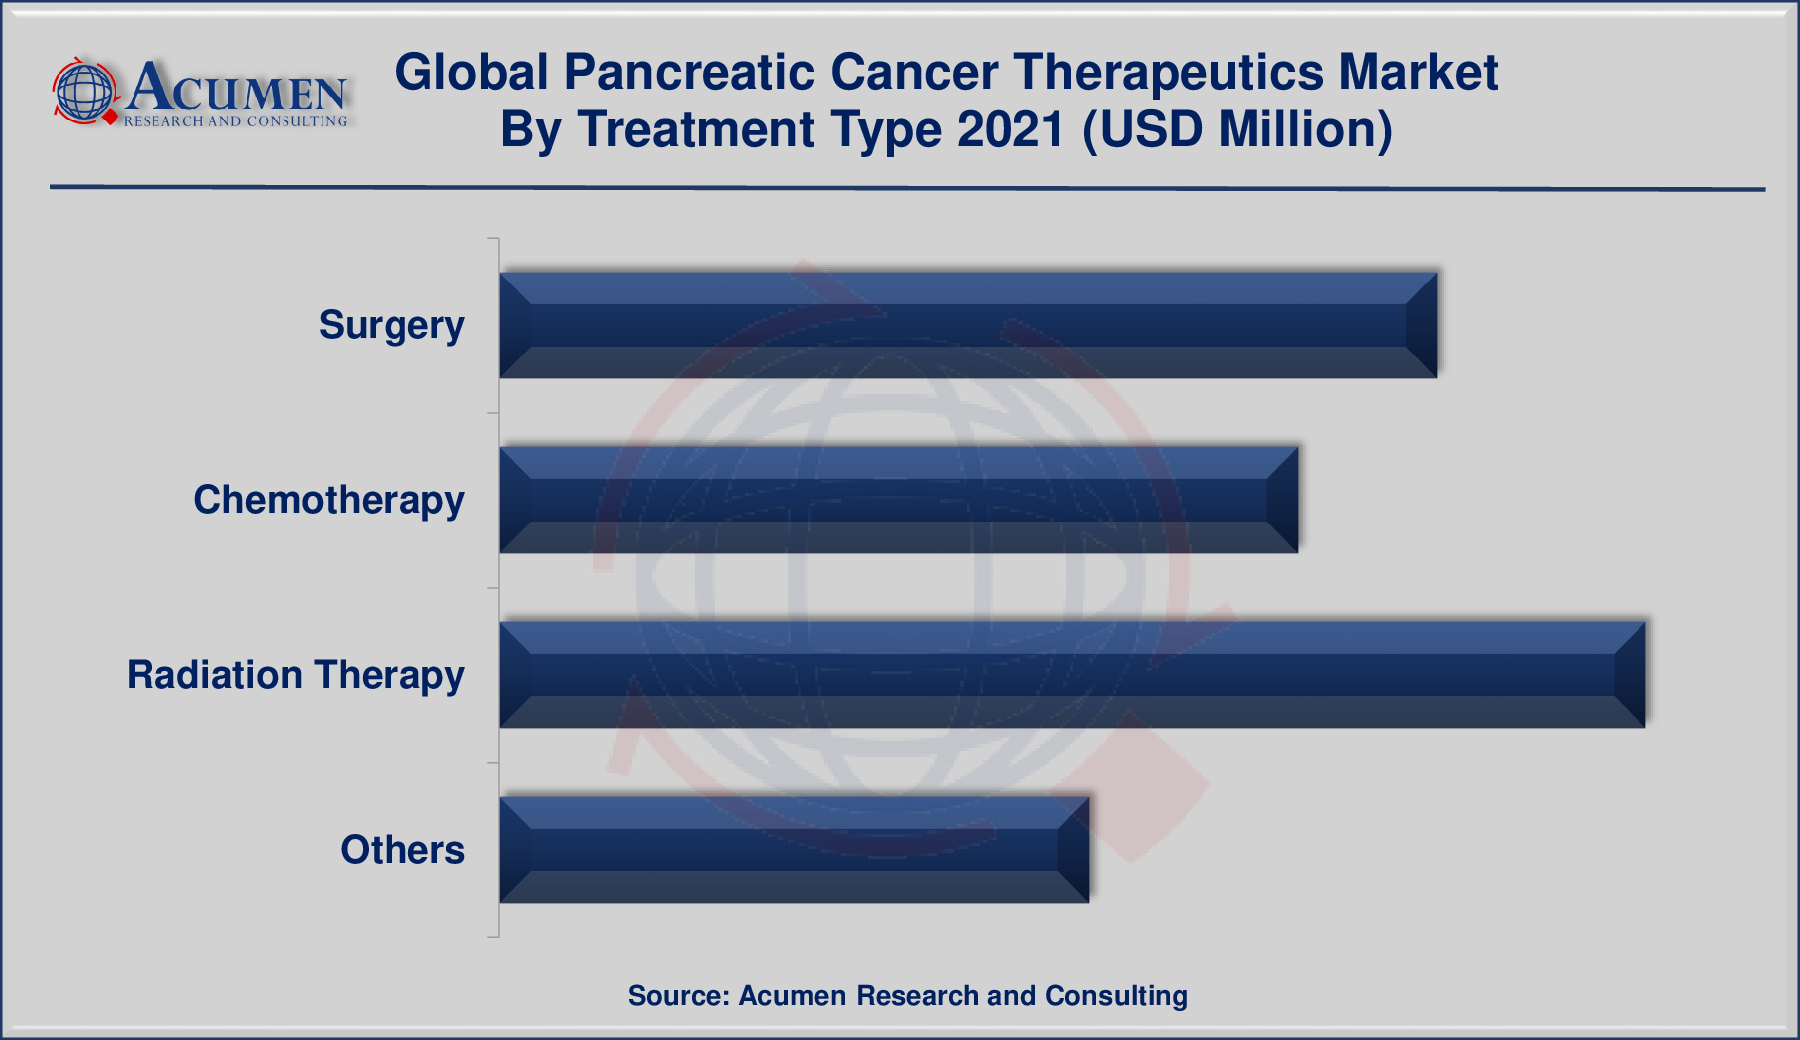 Pancreatic Cancer Therapeutics Market By Treatment Type is predicted to be worth USD 6,575 Million by 2030, with a CAGR of 7.2%